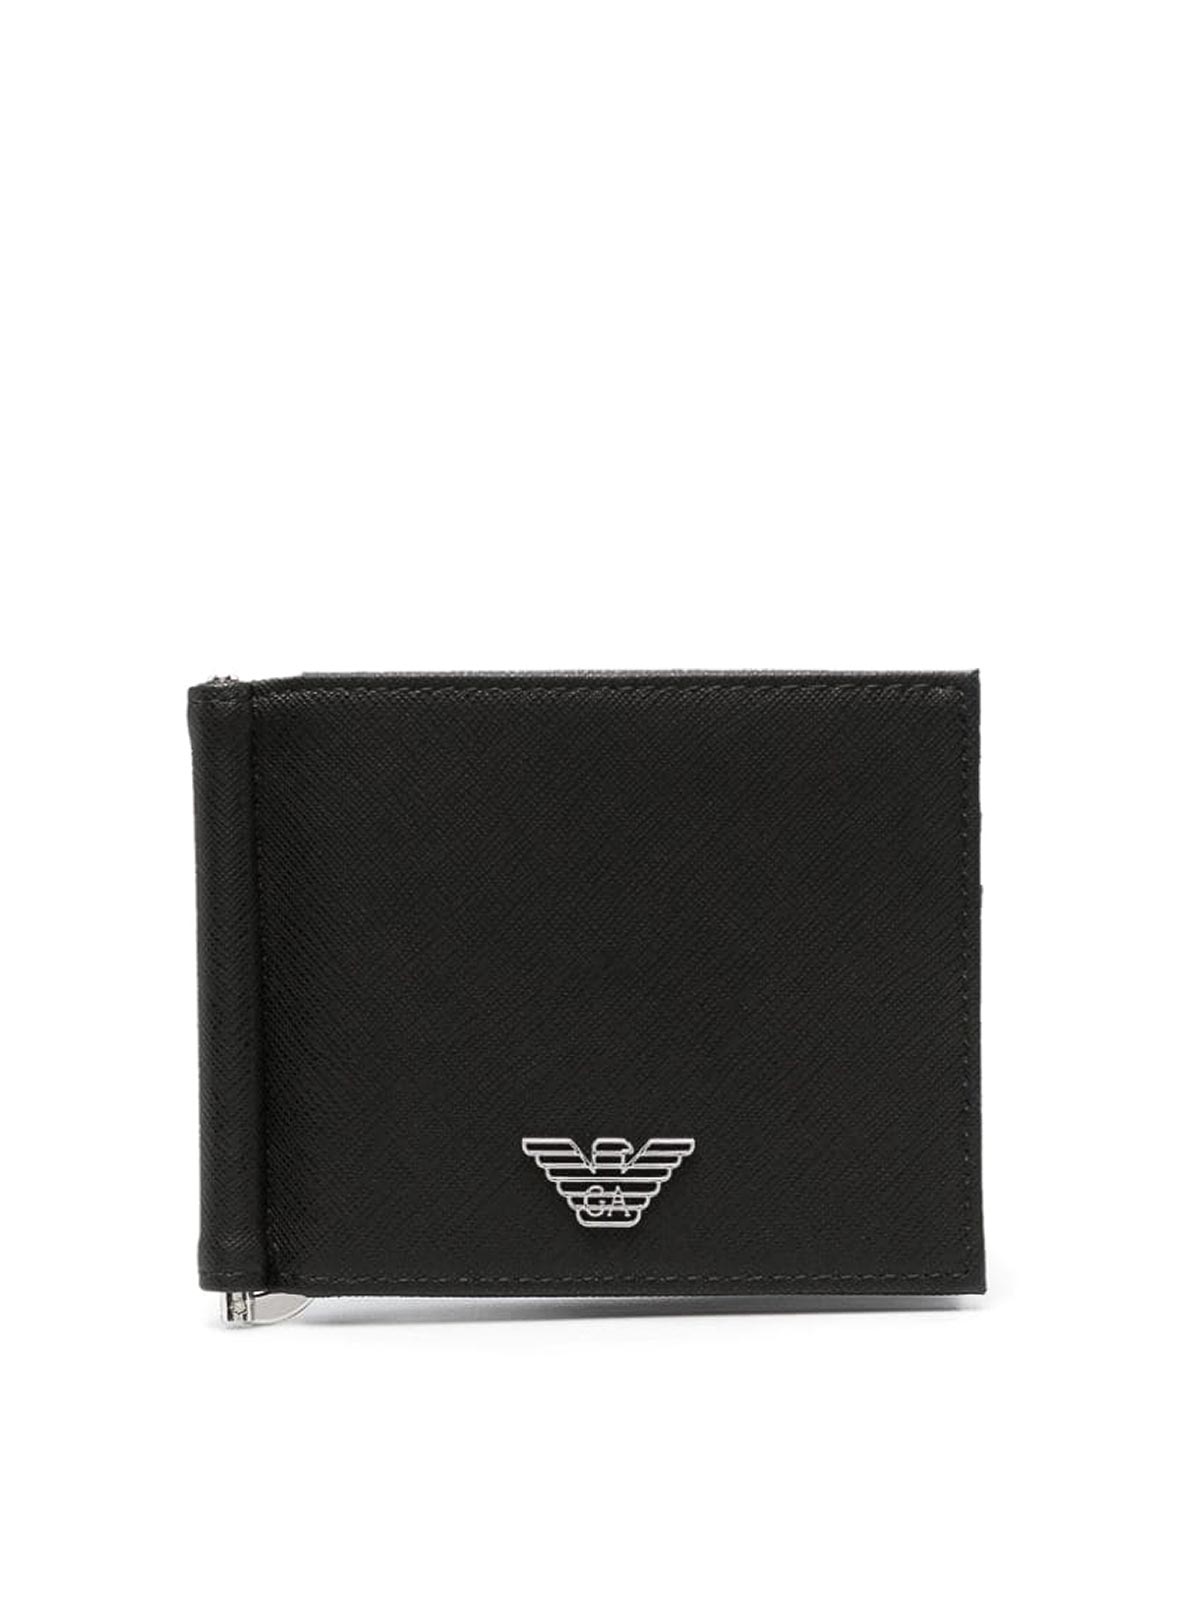 Ea7 Leather Compact Wallet In Black